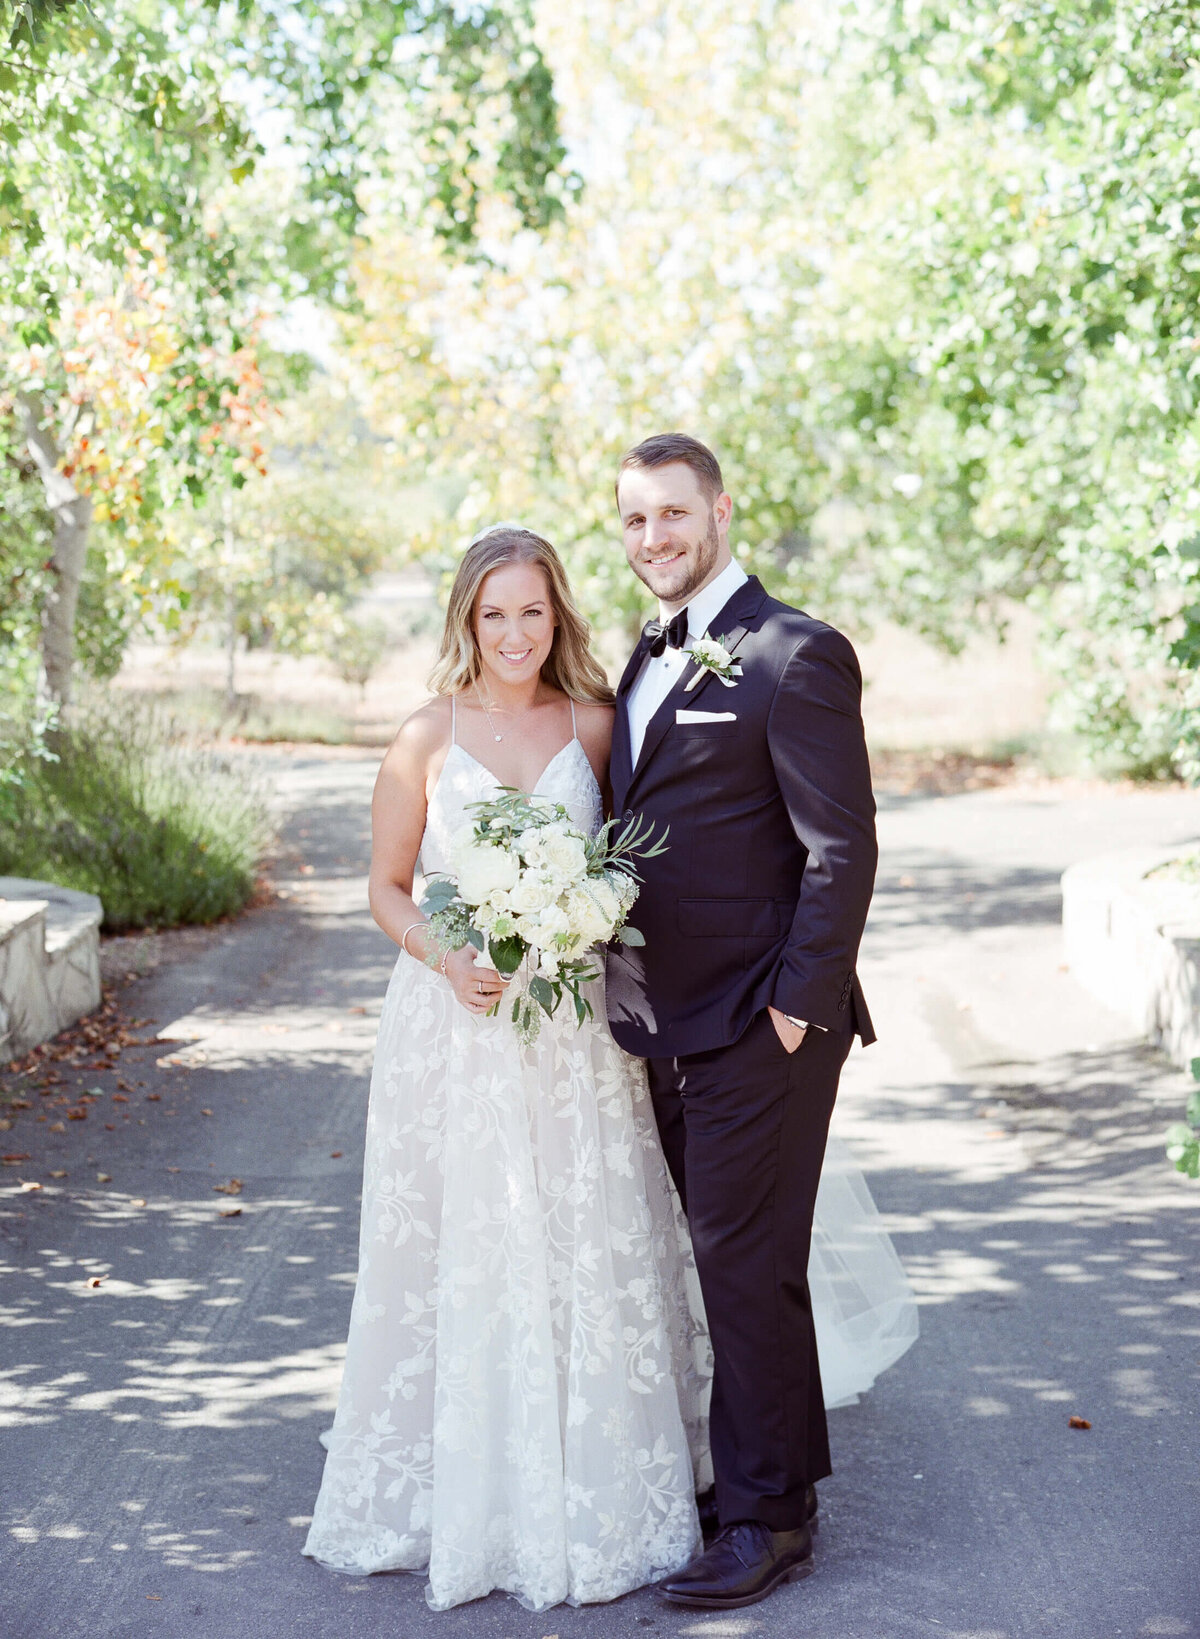 Courtyard wedding in Wine Country photographed by Wedding Portrait Photographer Robin Jolin.